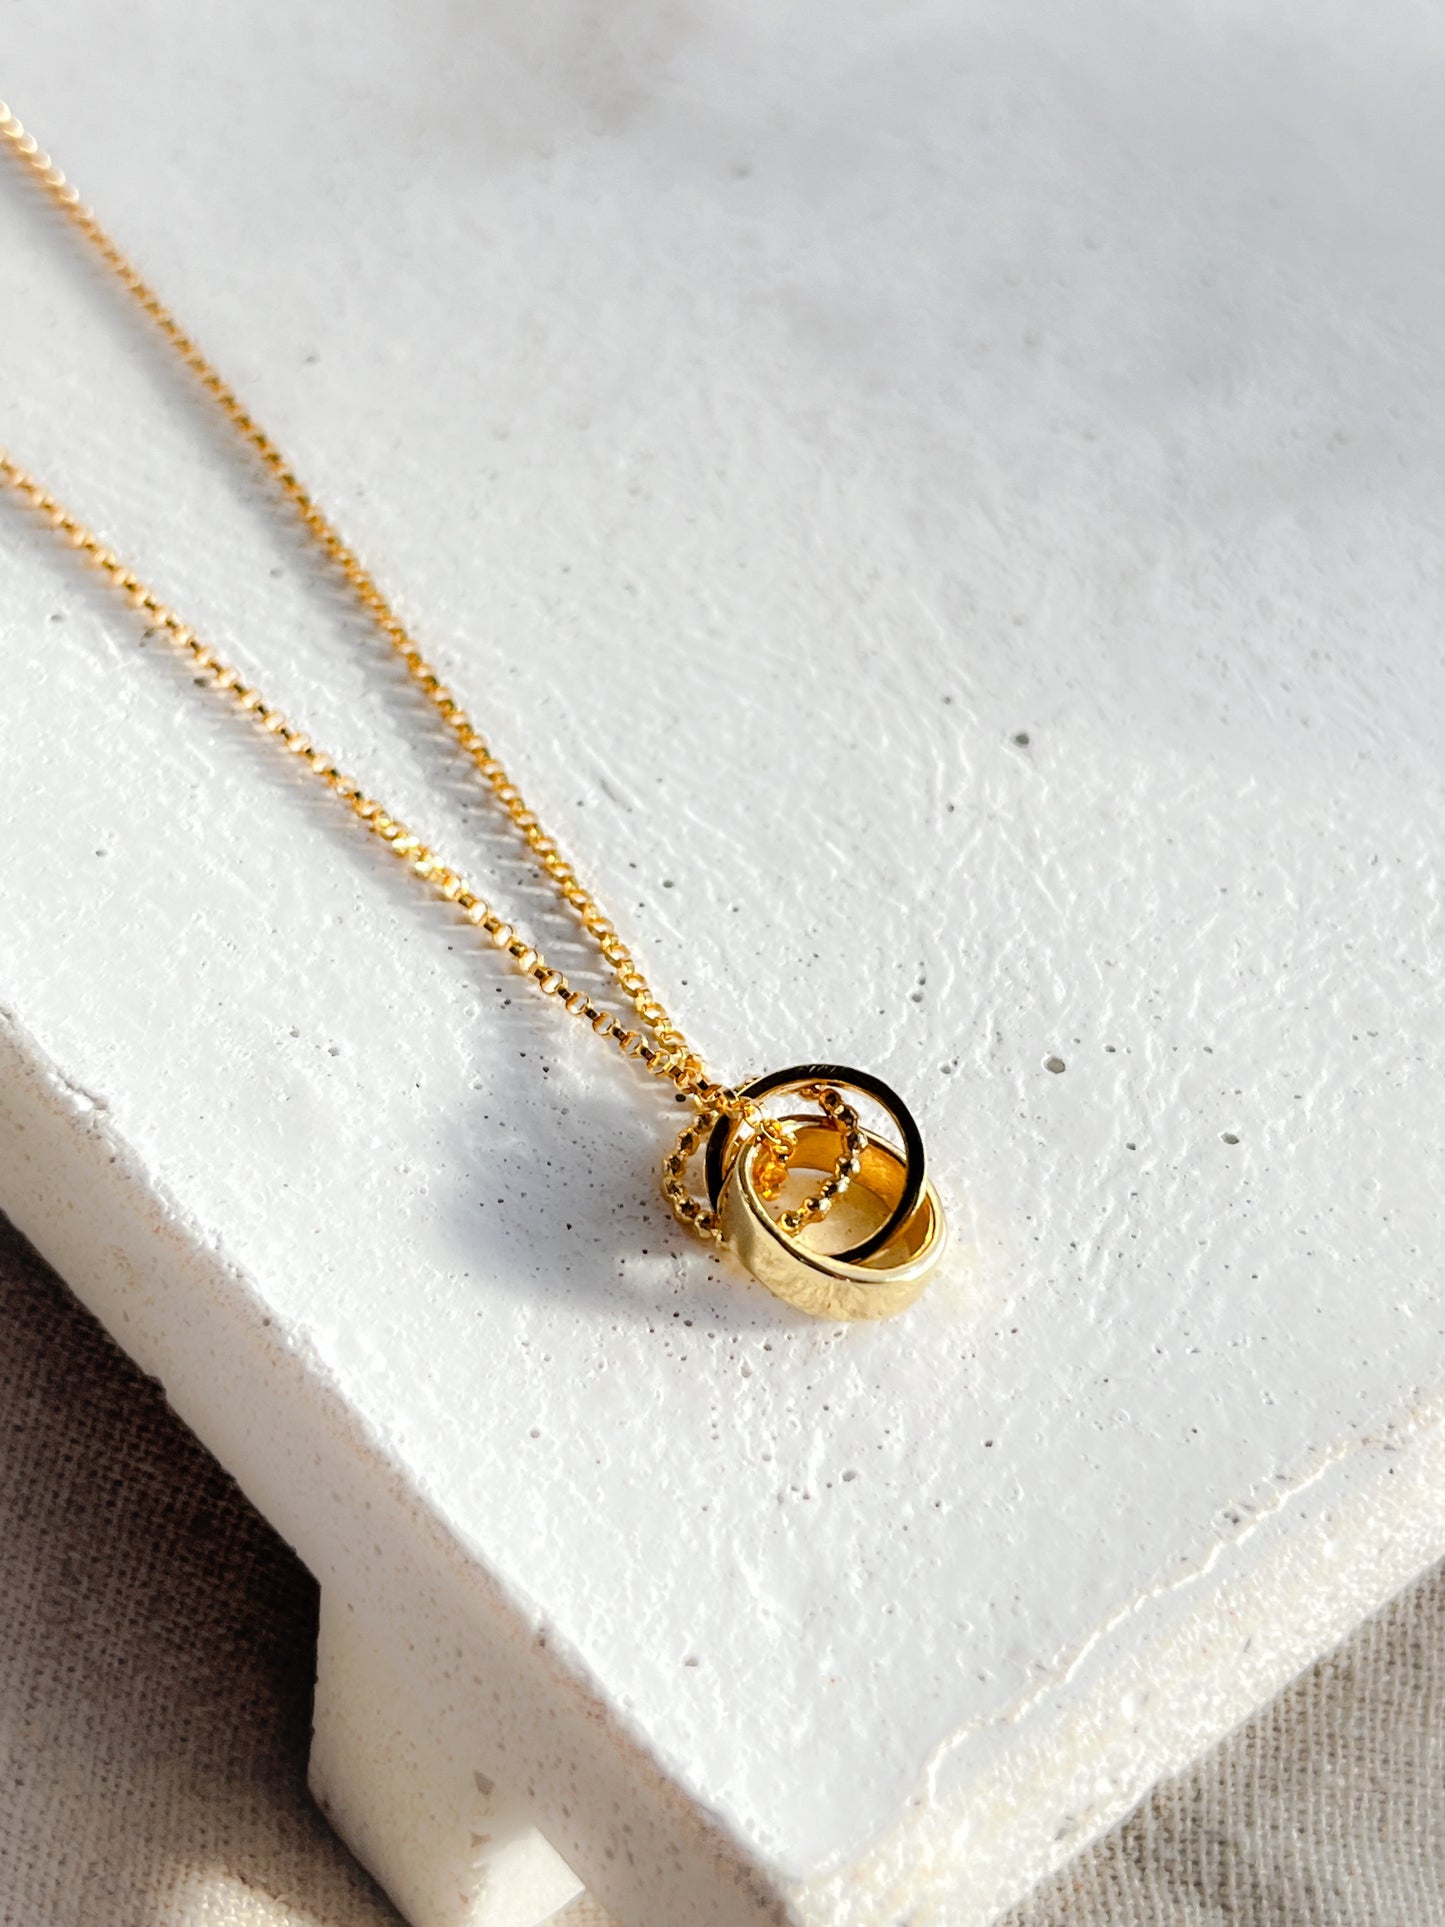 Gold Vermeil Multi Links of Love Necklace